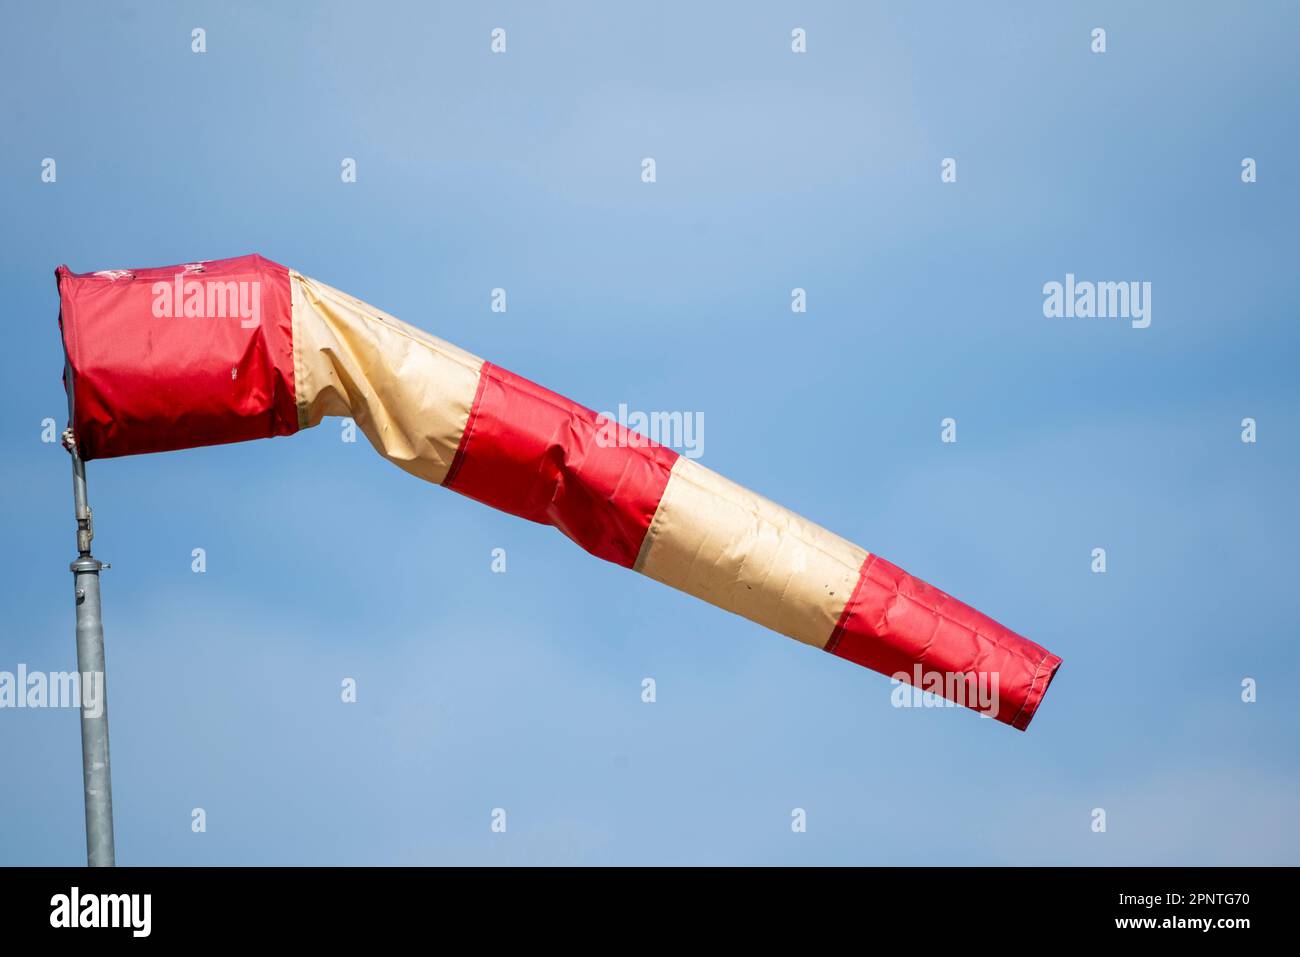 Red and white windsock at an airport, showing wind direction and strength, Stock Photo